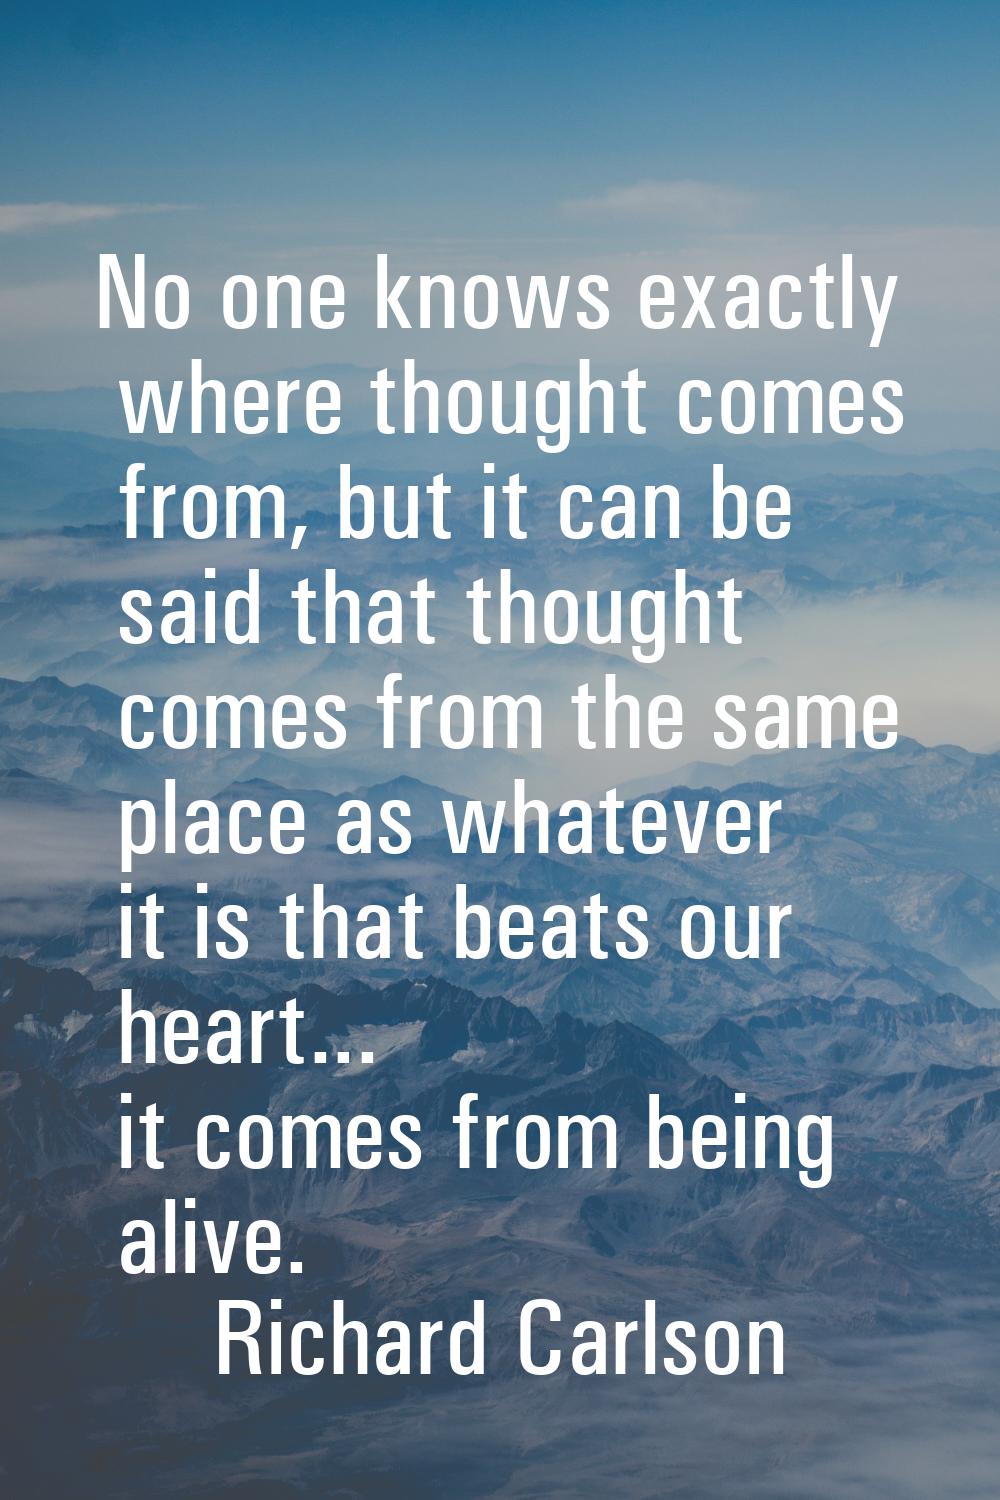 No one knows exactly where thought comes from, but it can be said that thought comes from the same 